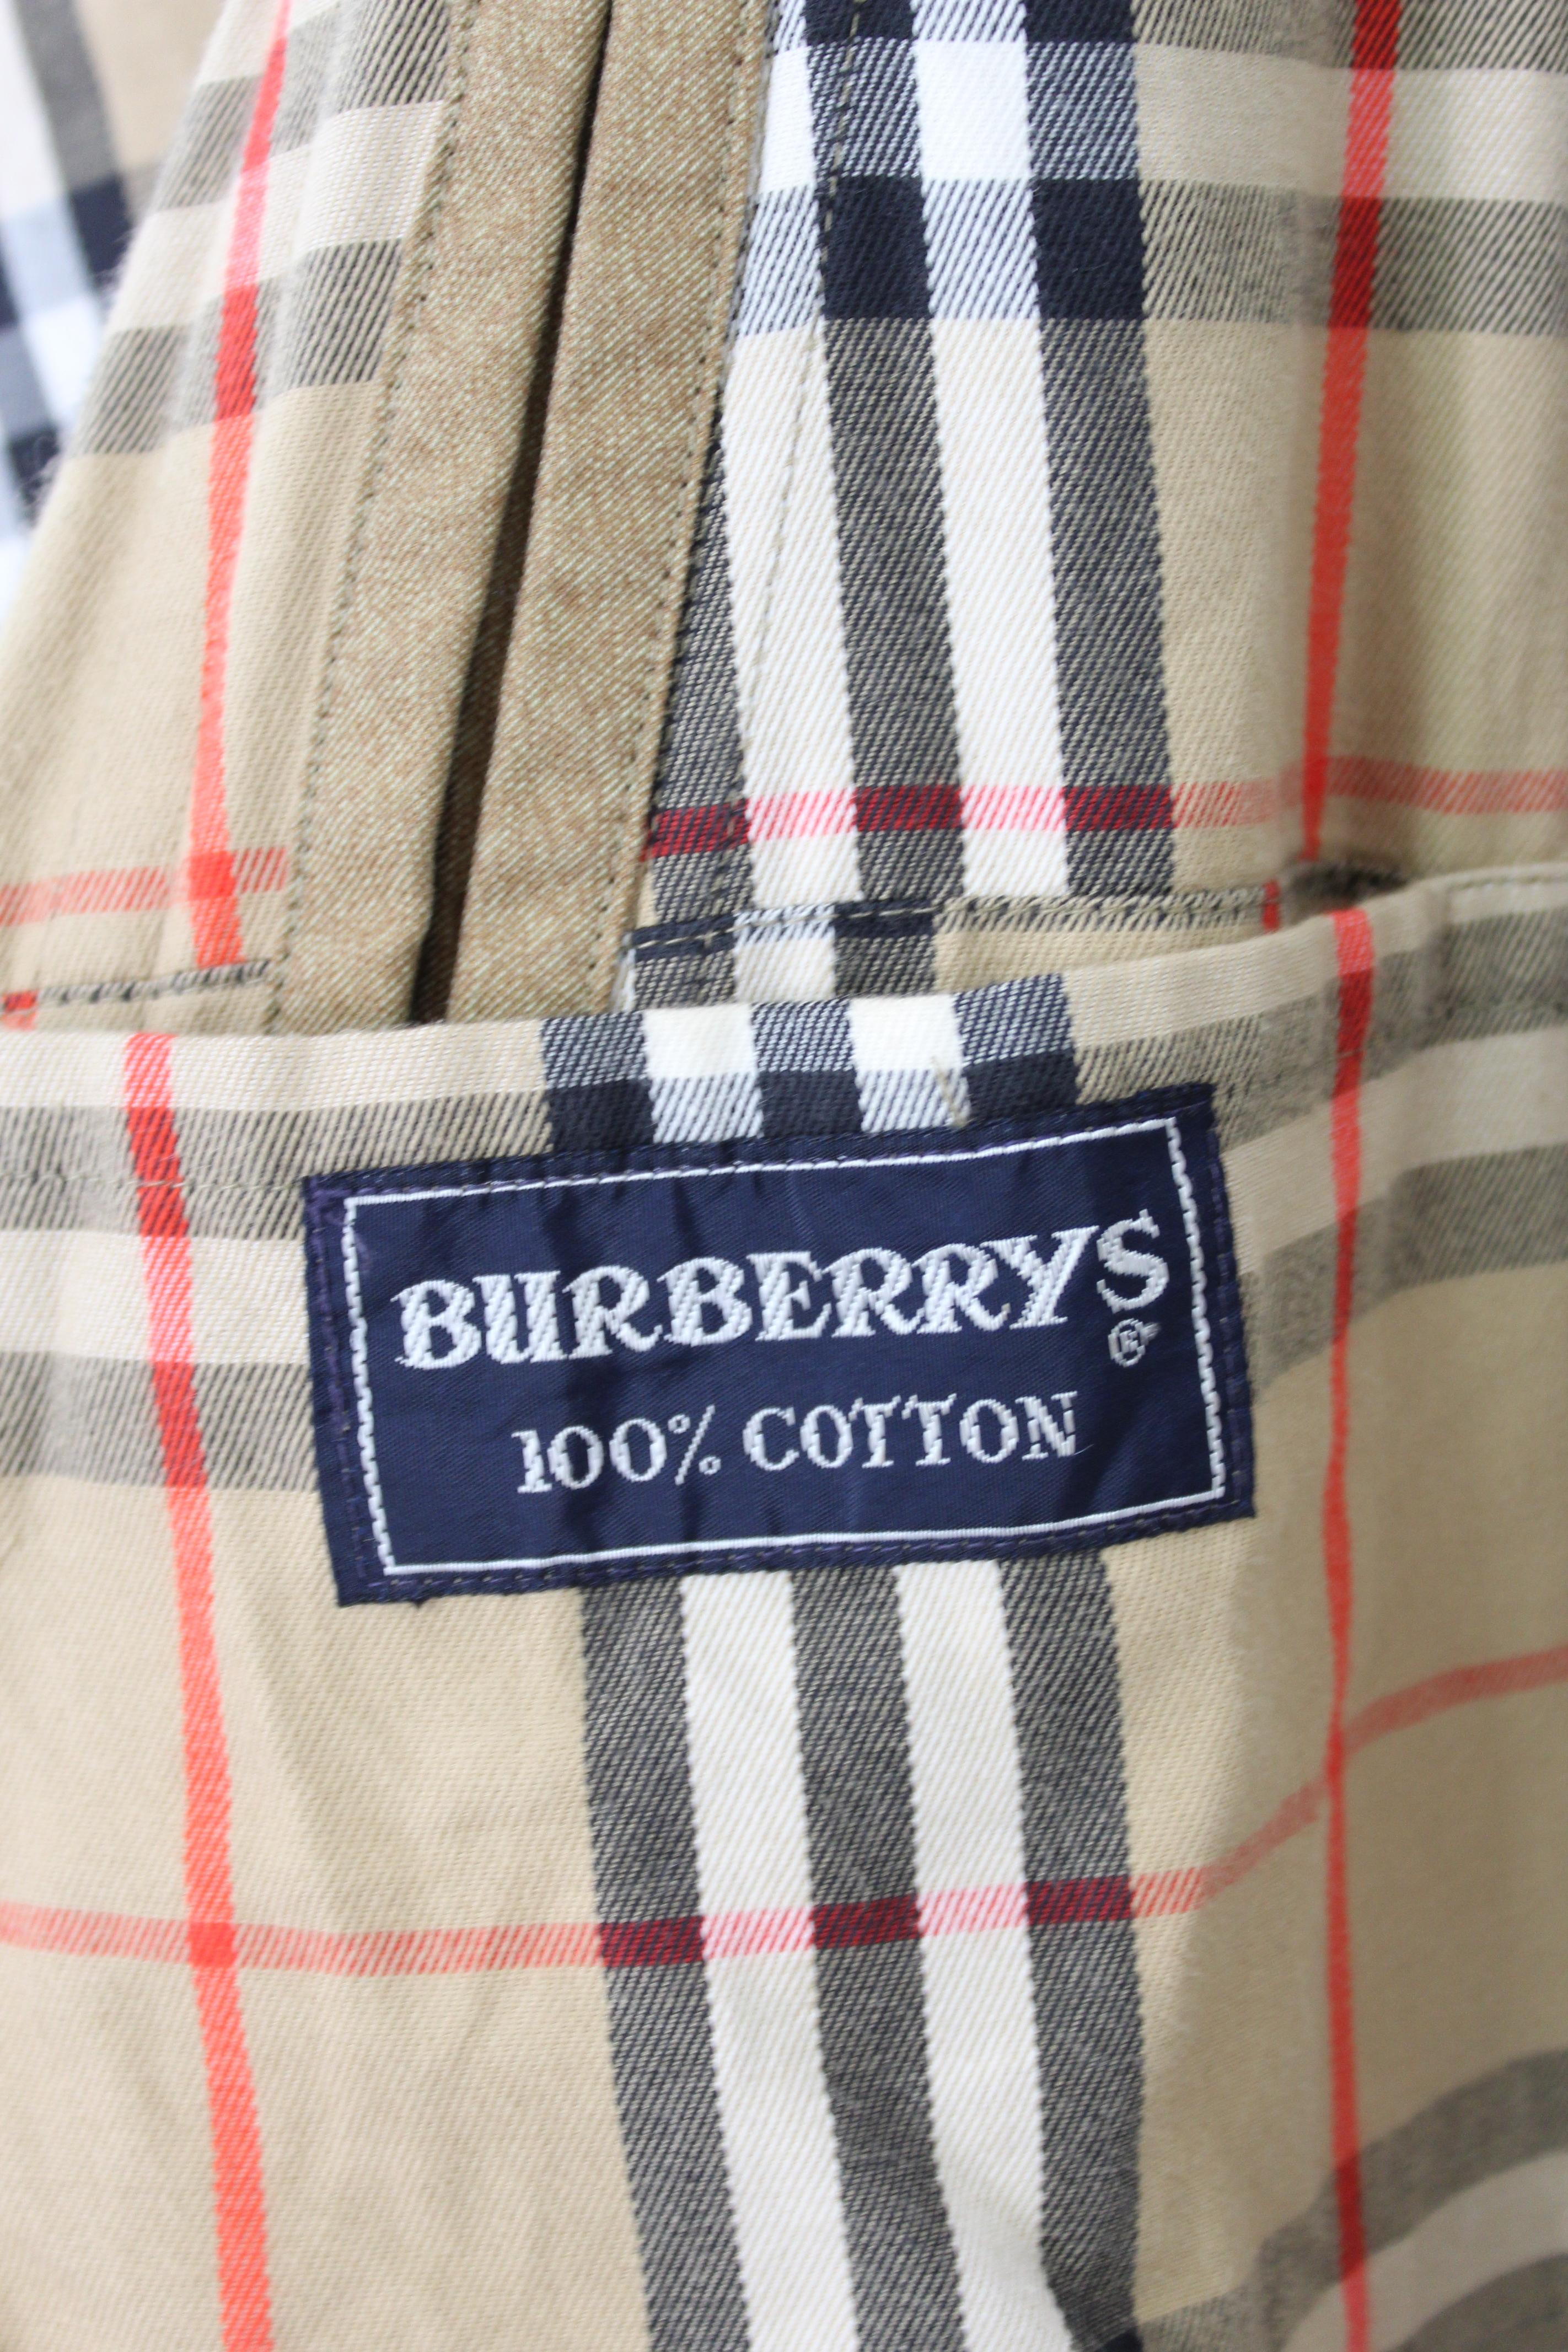 Burberry Beige Cotton Double Breasted Trench Coat 1980s 6